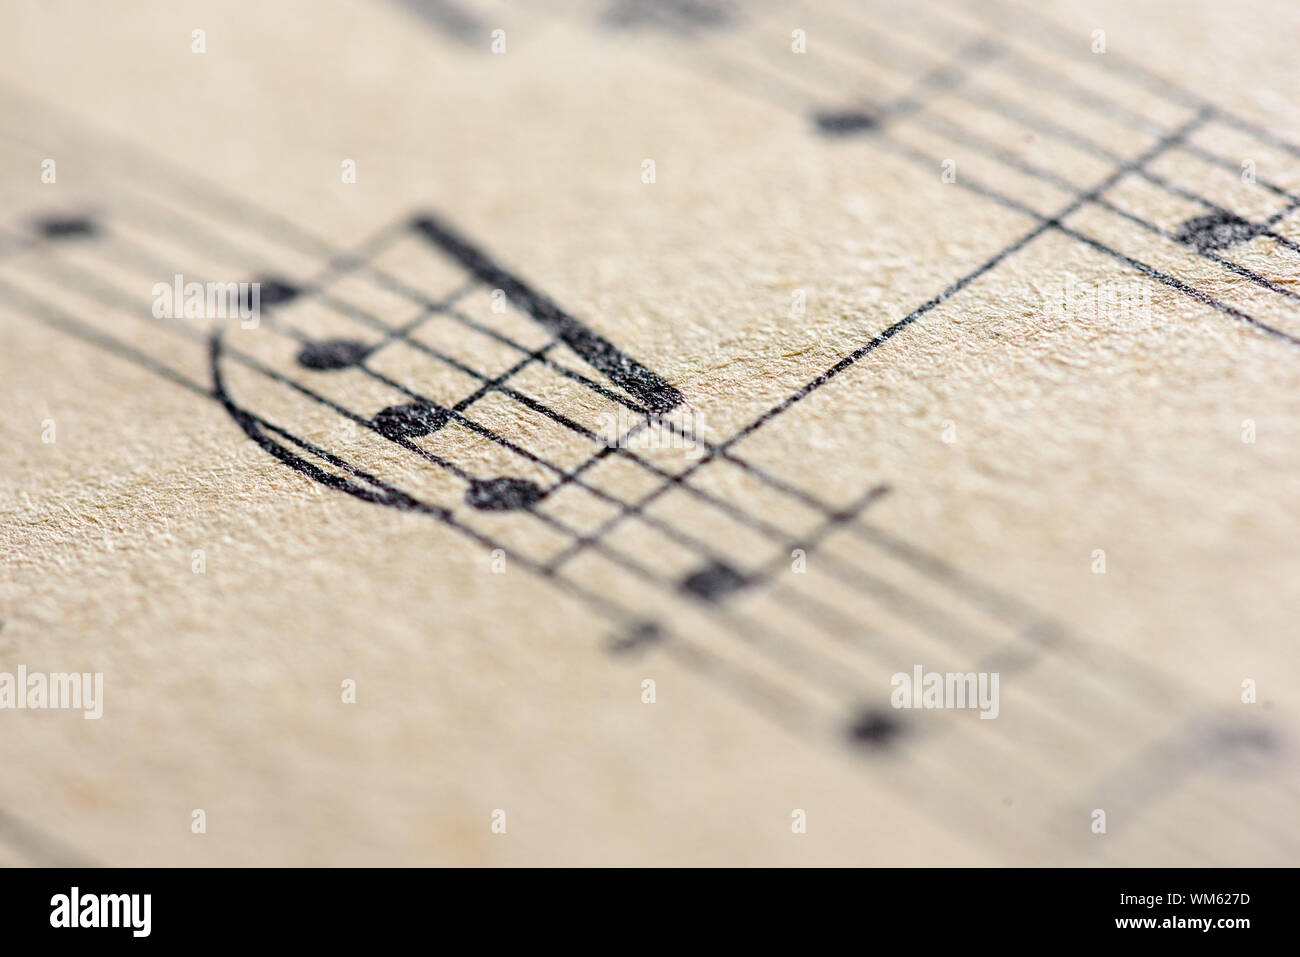 Aged sepia effect of a macro closeup shot of musical notes written on paper notes in traditional sheet music format Stock Photo